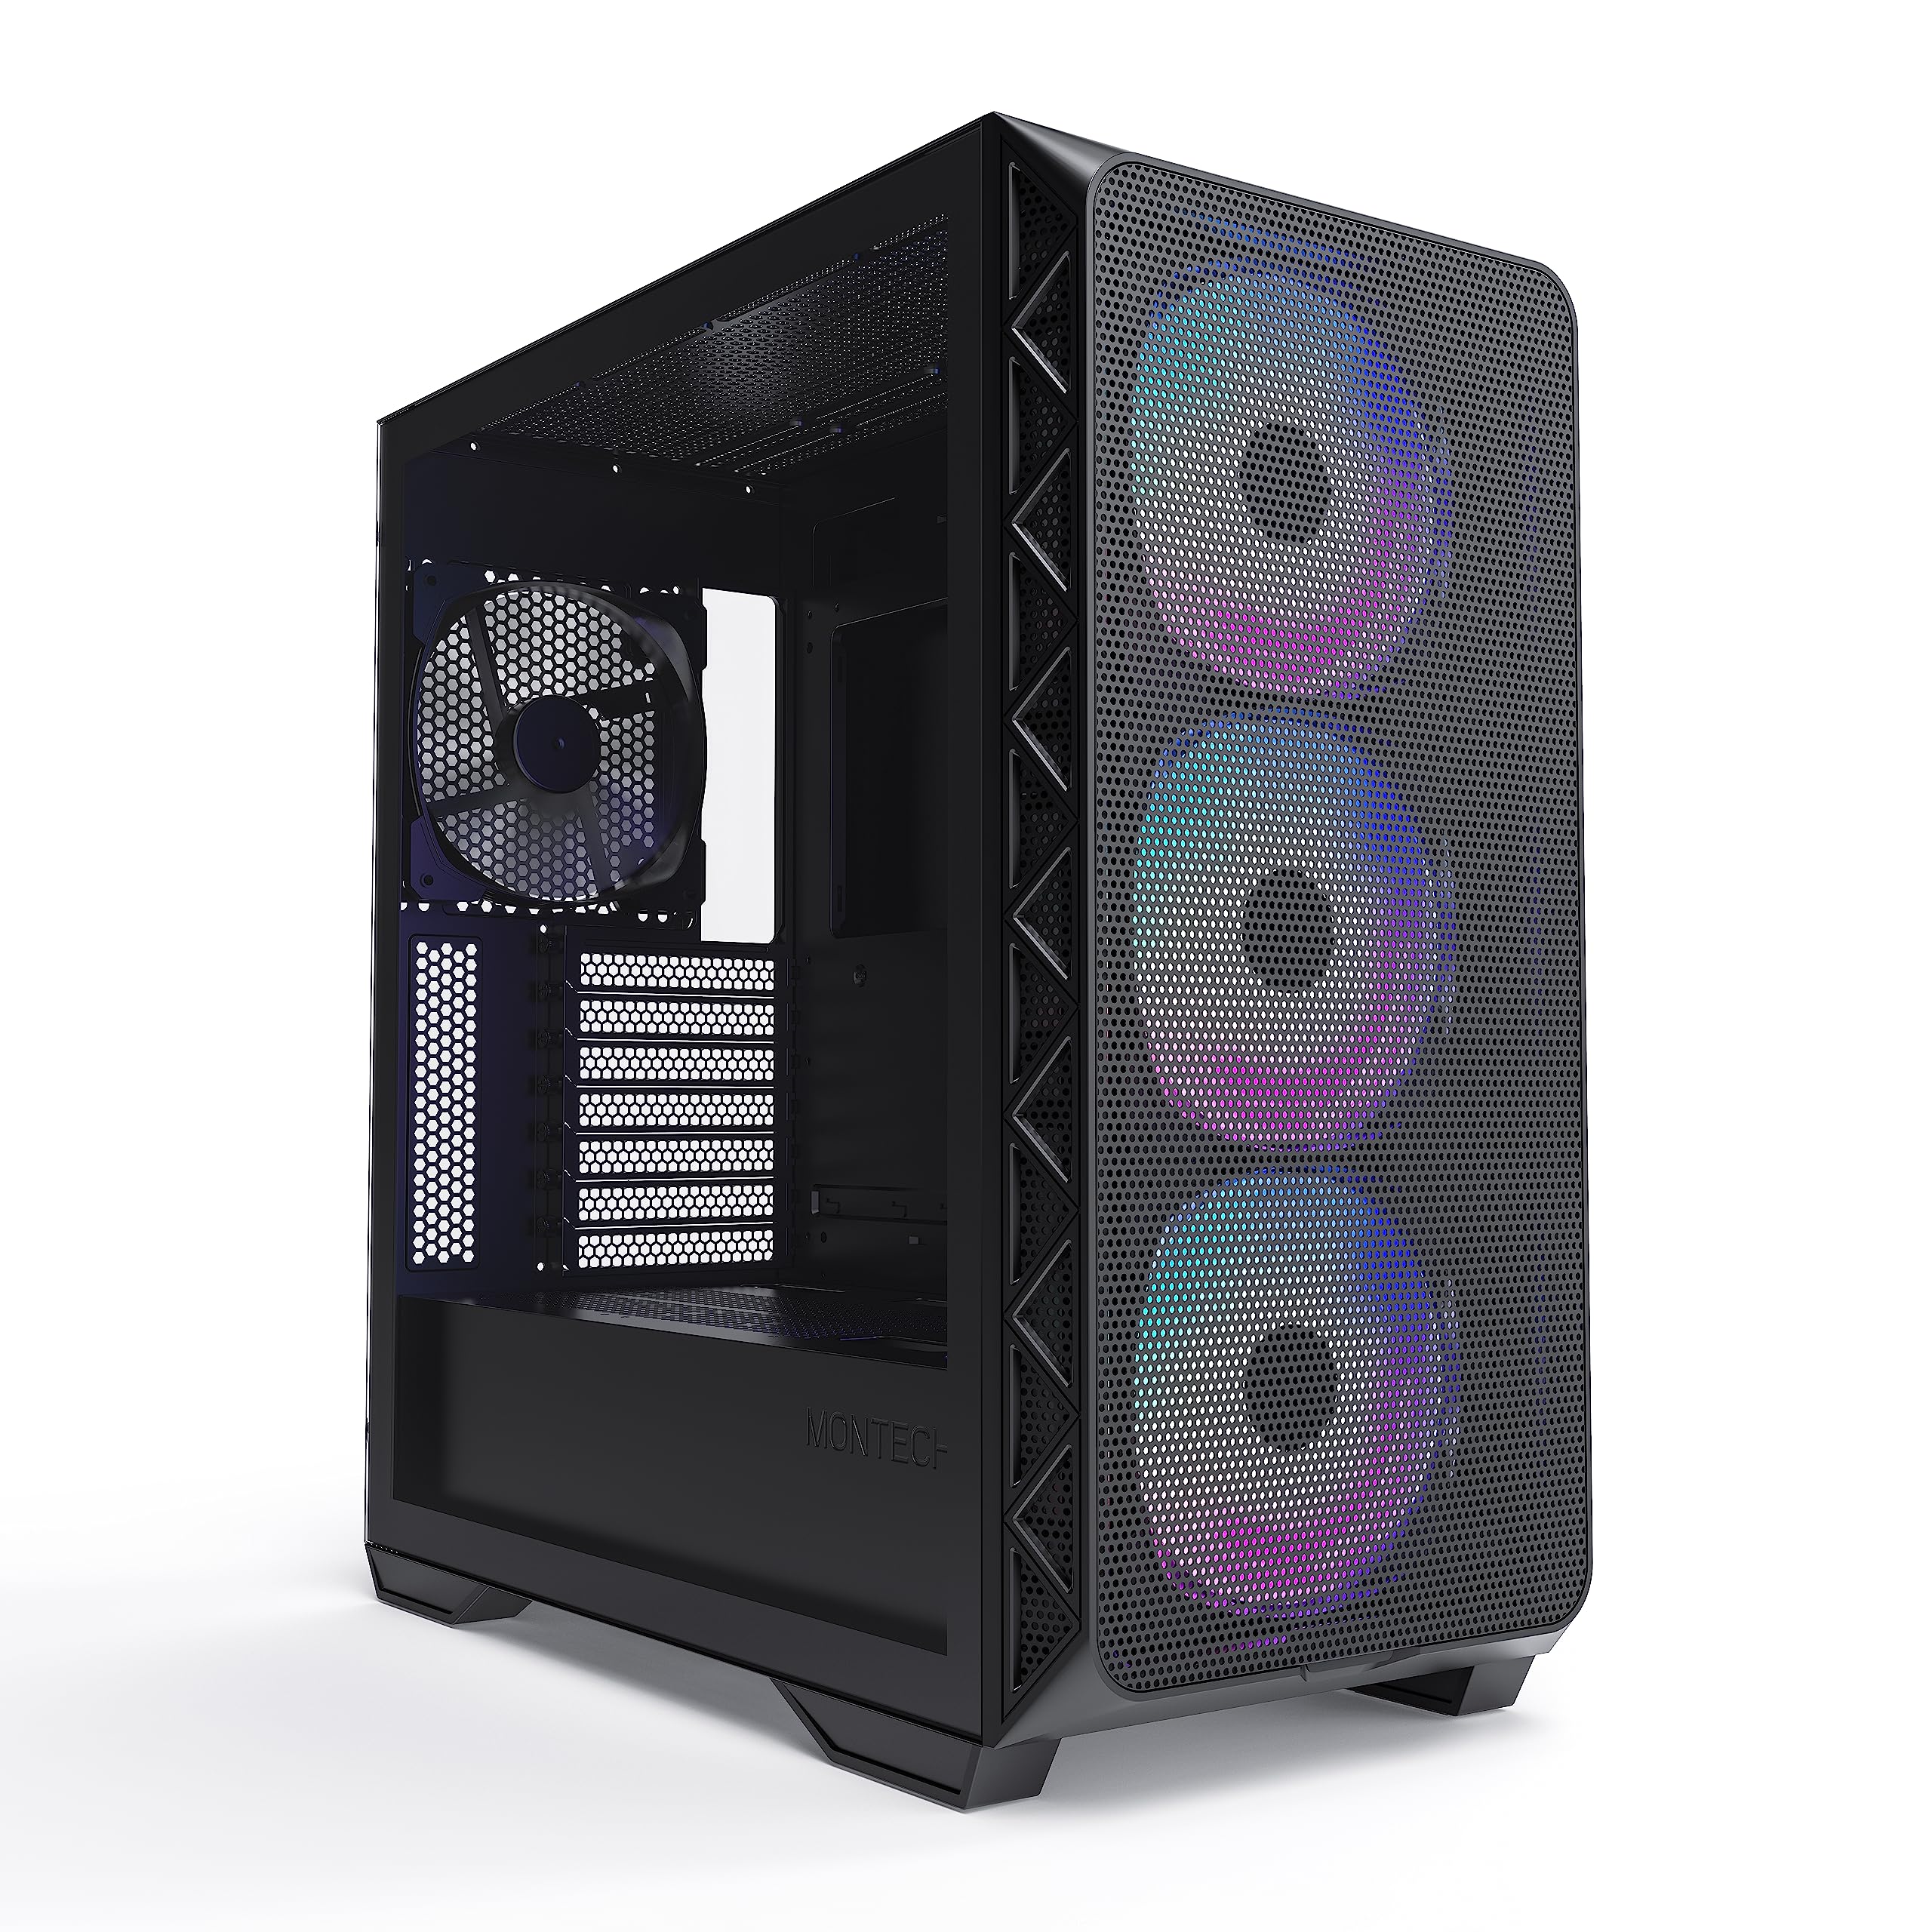 Montech AIR 903 MAX, E-ATX Mid Tower Case, High Airflow, 3X 140mm ARGB PWM & 1x 140mm PWM Fans Pre-Installed, Tempered Glass Side Panel, Mesh Front, Type-C, Support 4090 GPUs, Black